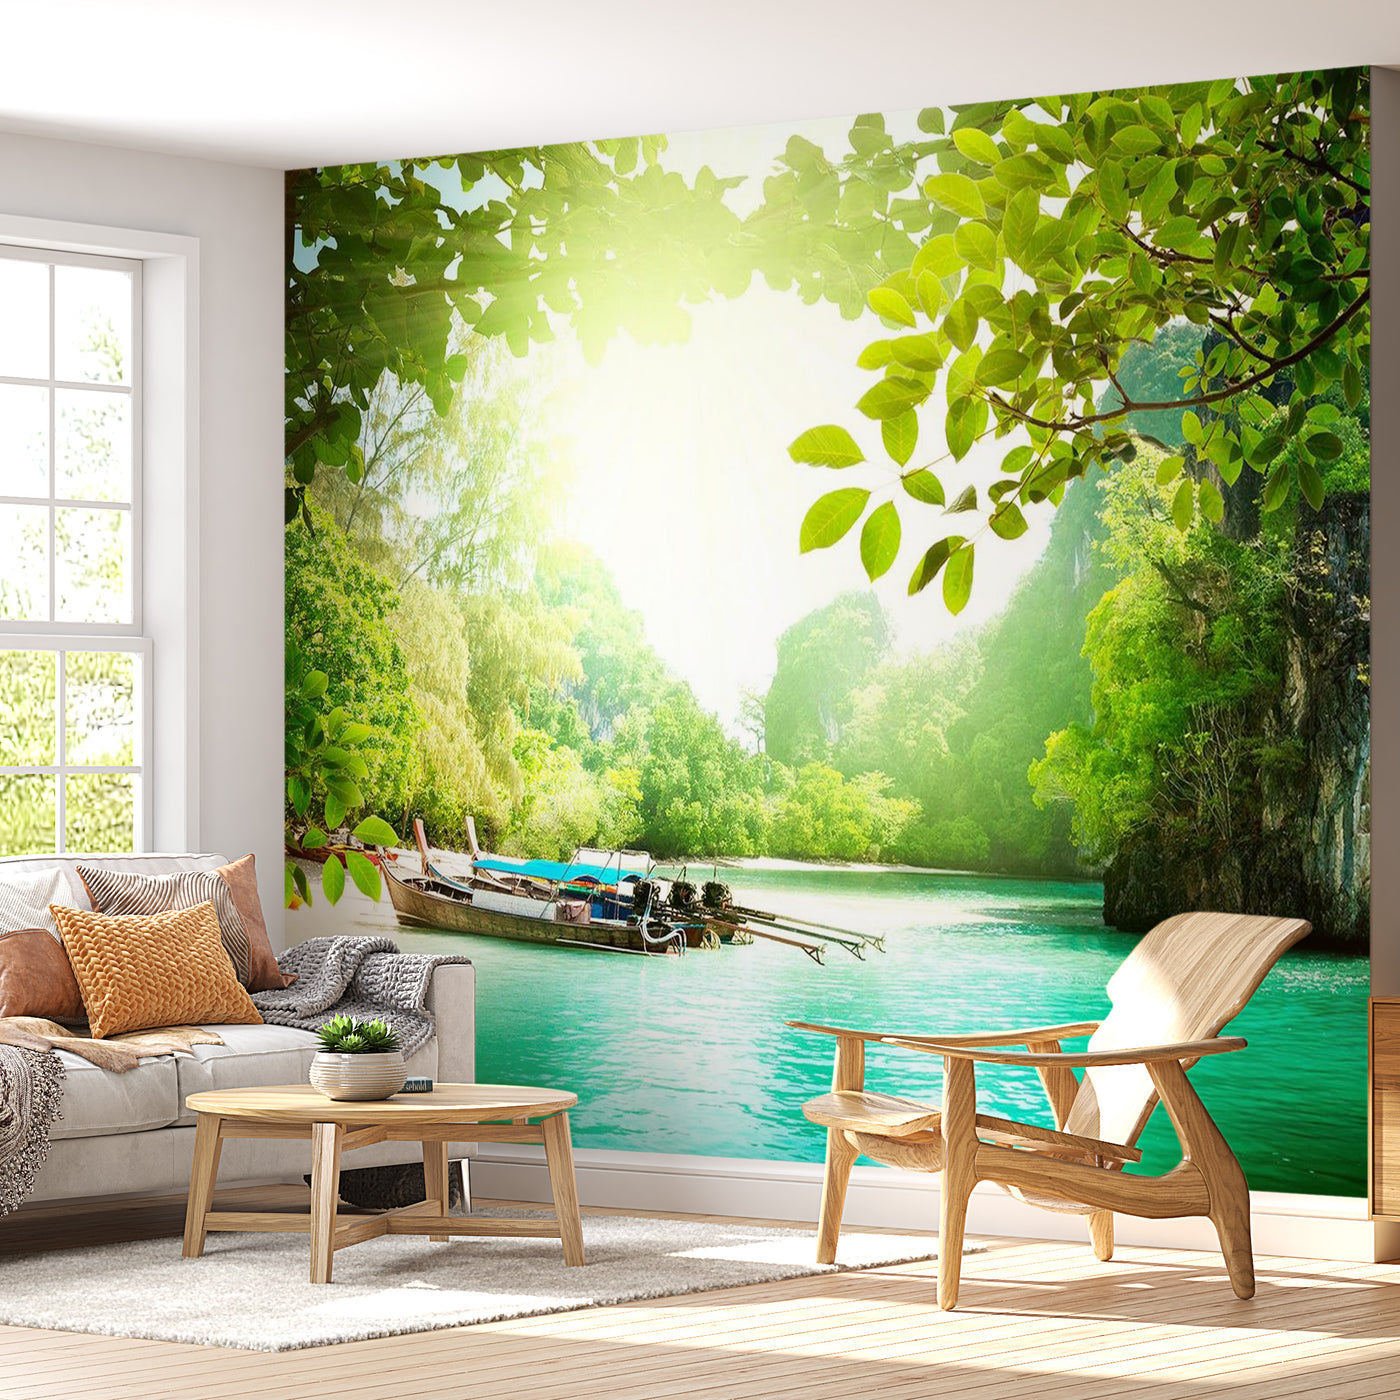 Peel & Stick Nature Wall Mural - Heavenly Landing - Removable Wall Decals